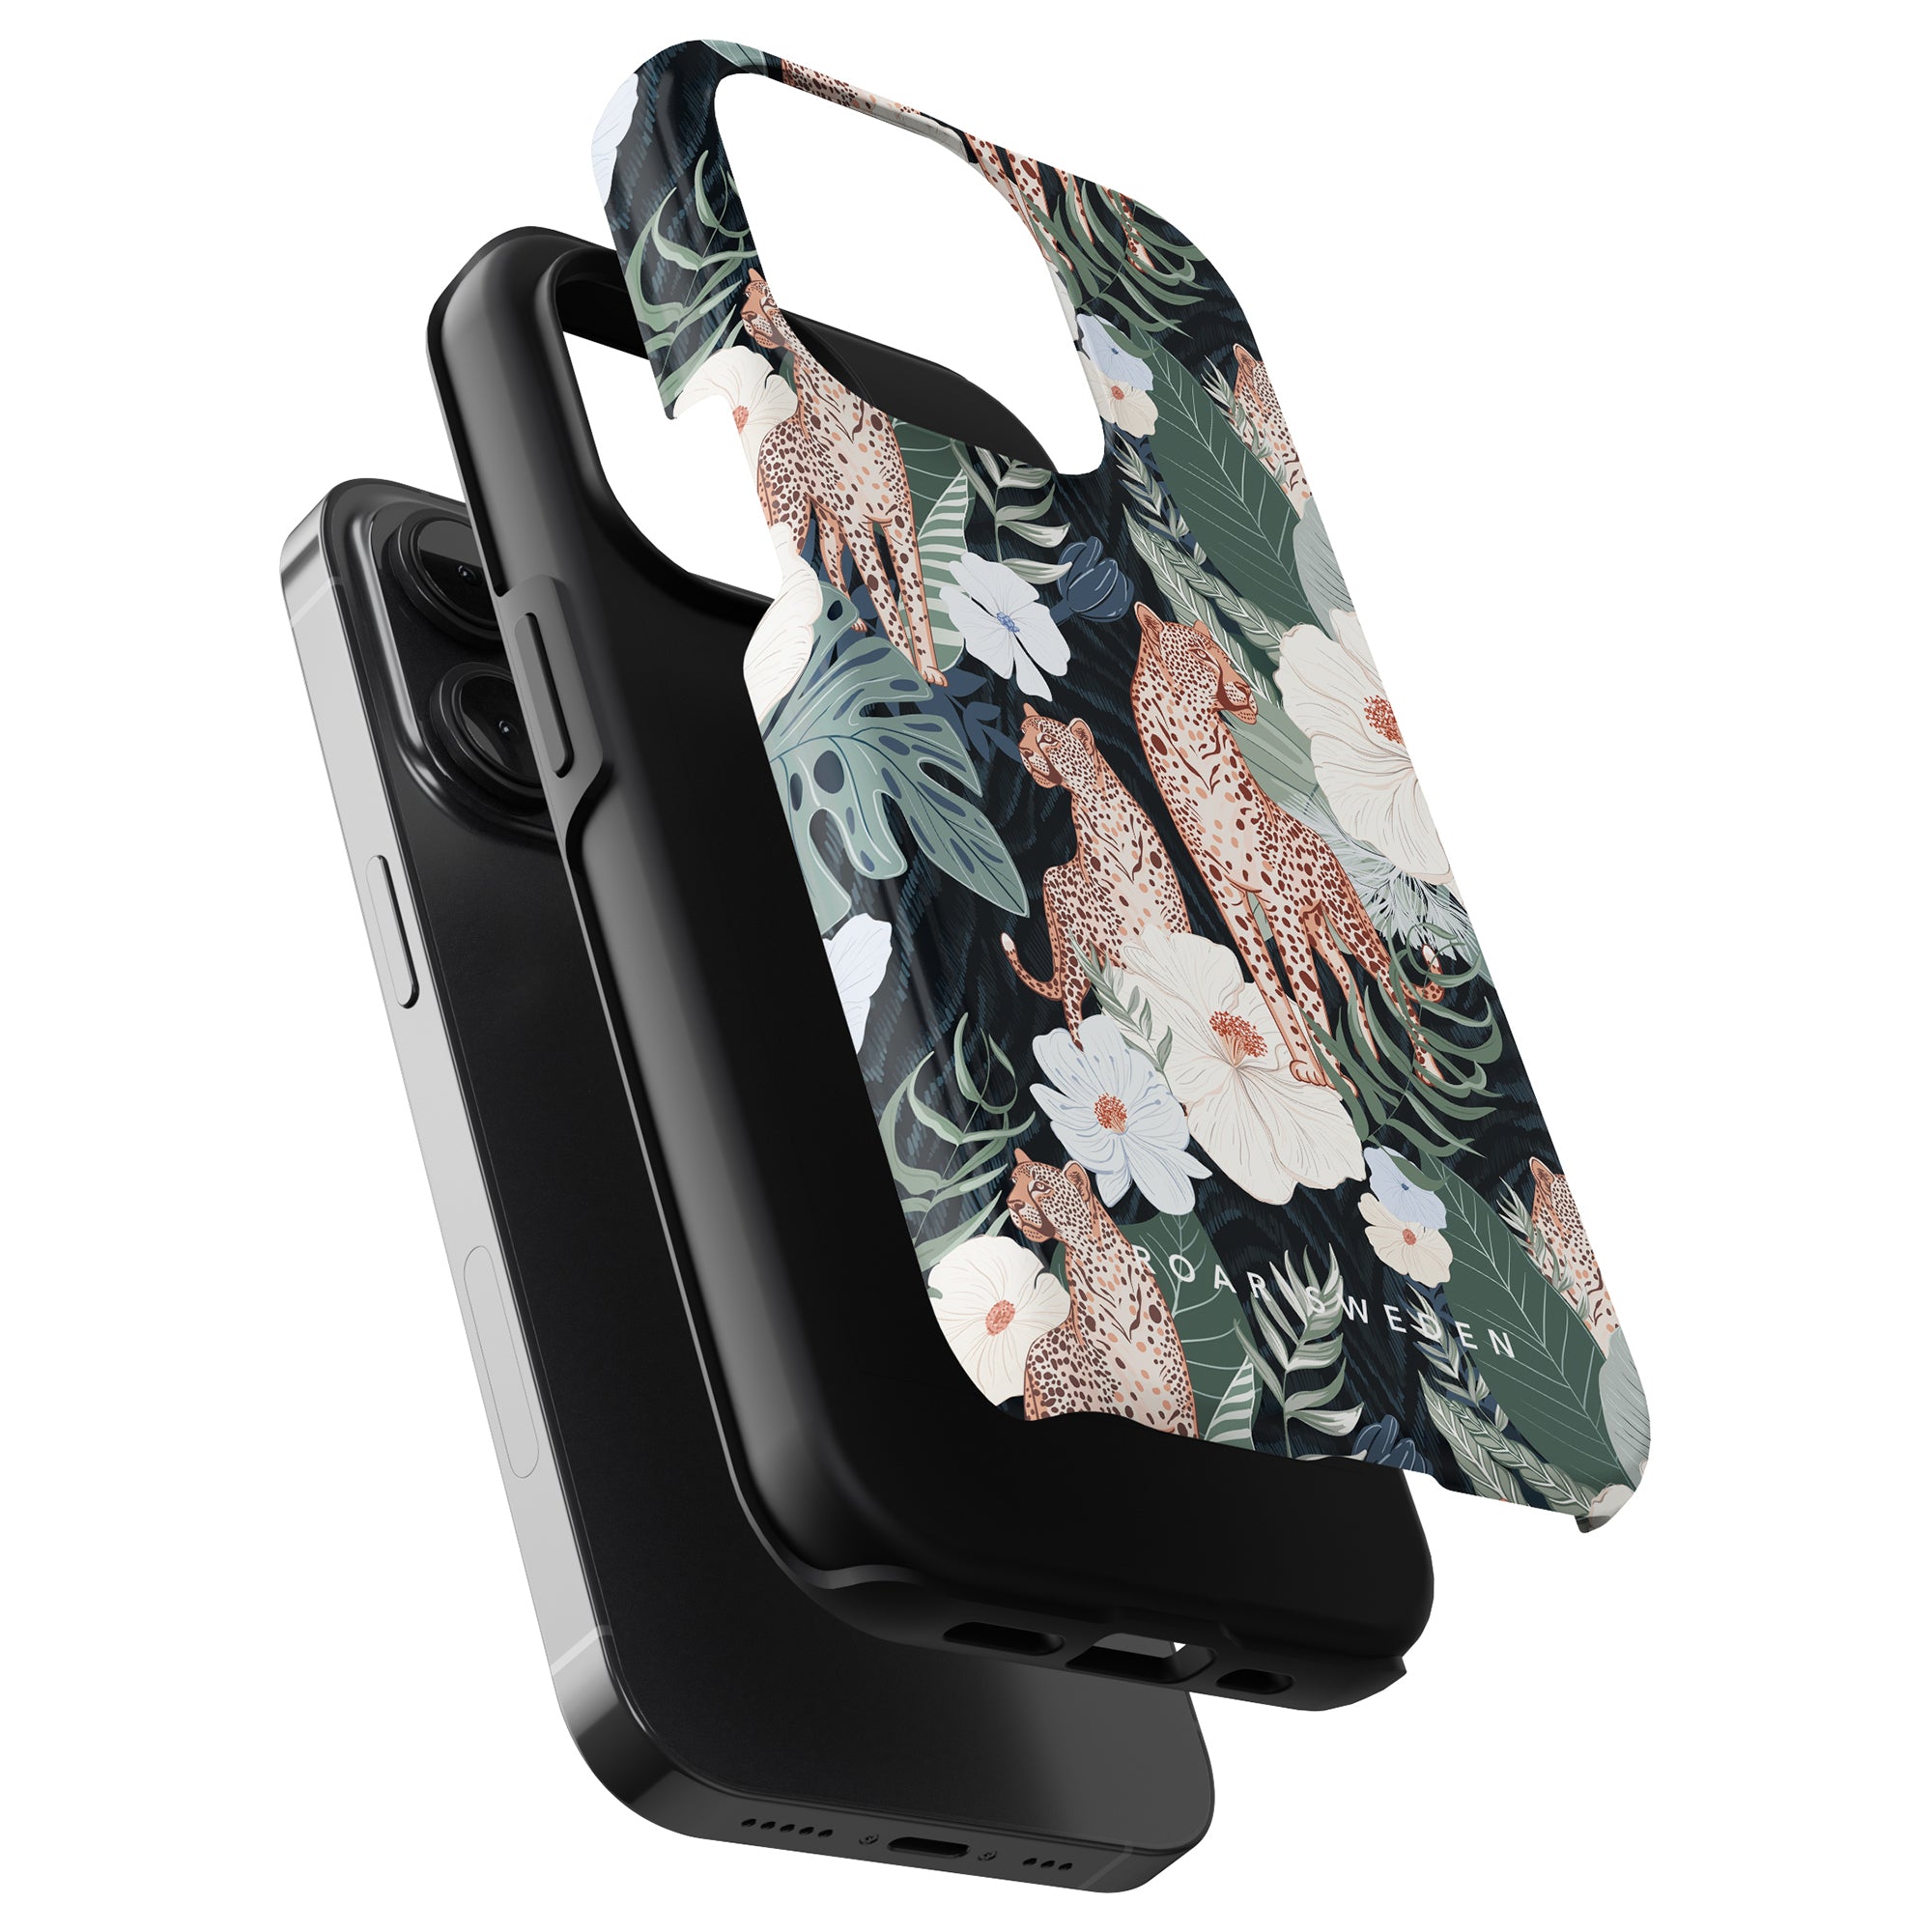 A smartphone in a Leopardess tough case attached to a decorative strap with a floral pattern on a white background.